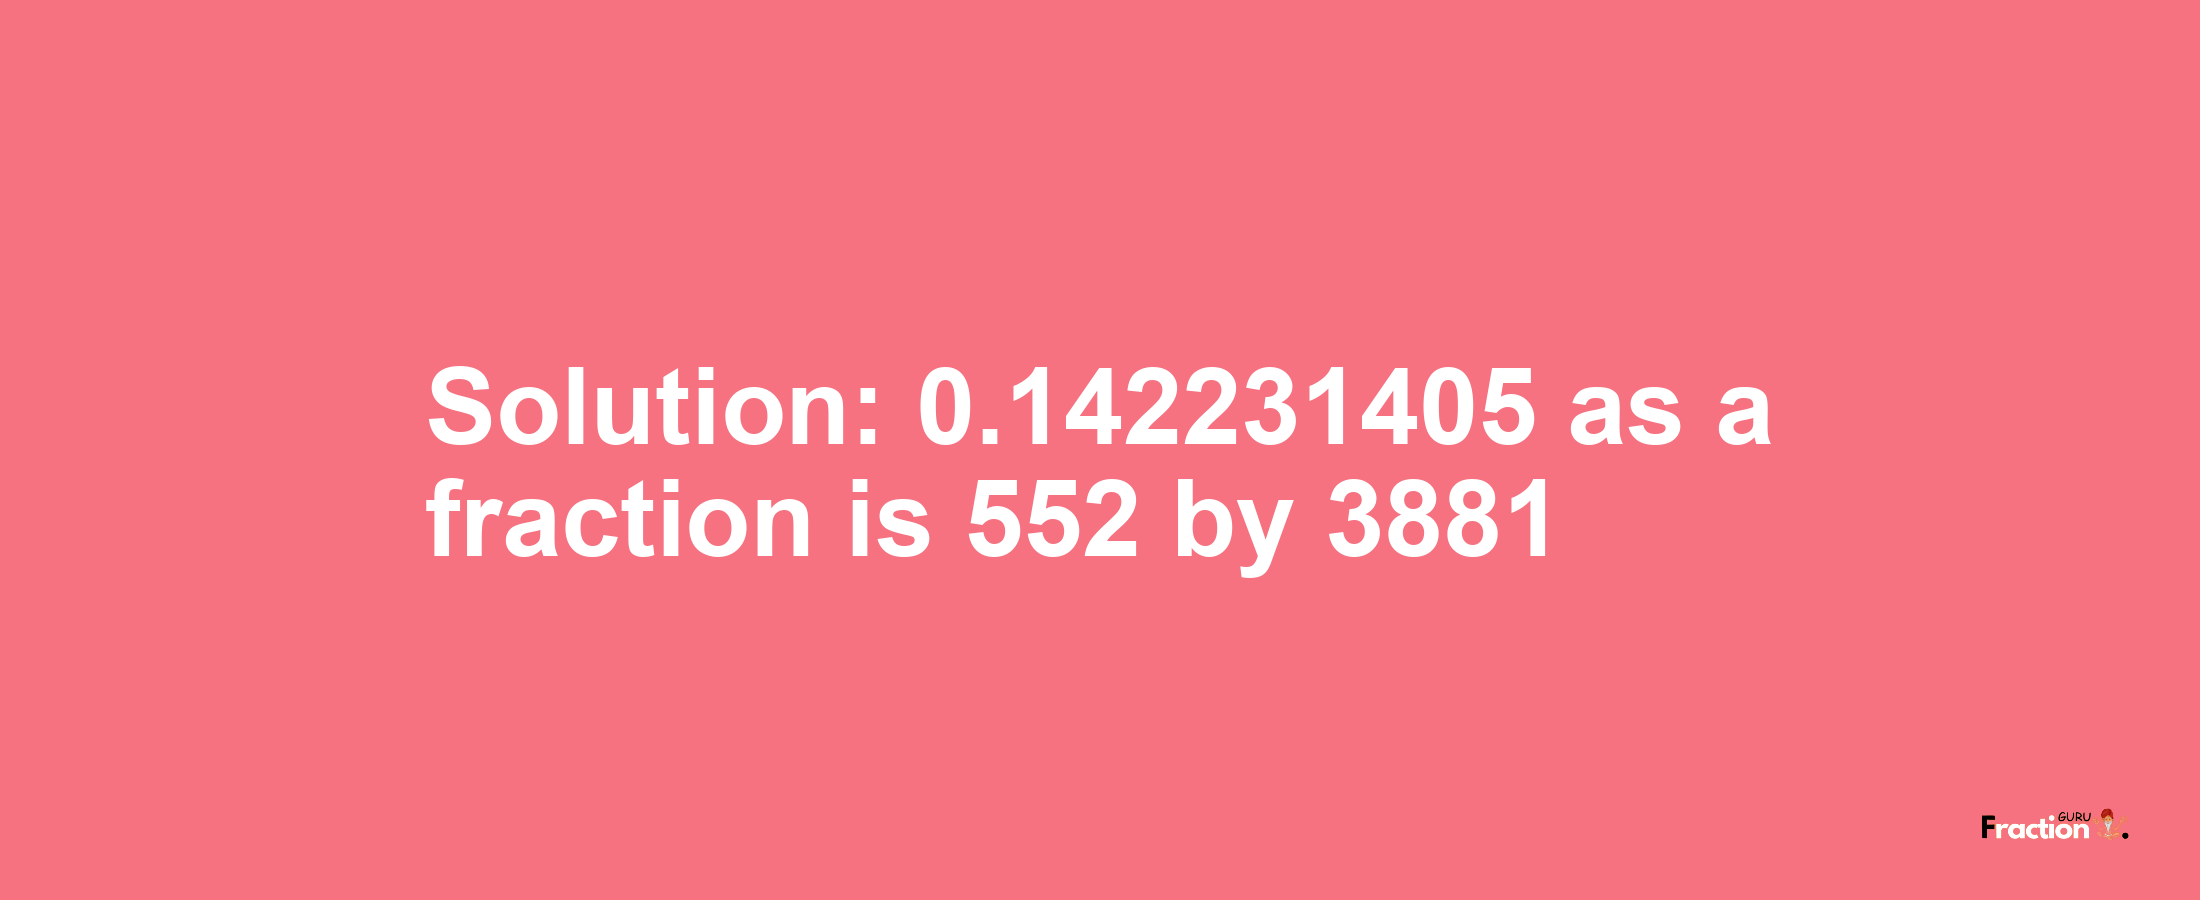 Solution:0.142231405 as a fraction is 552/3881